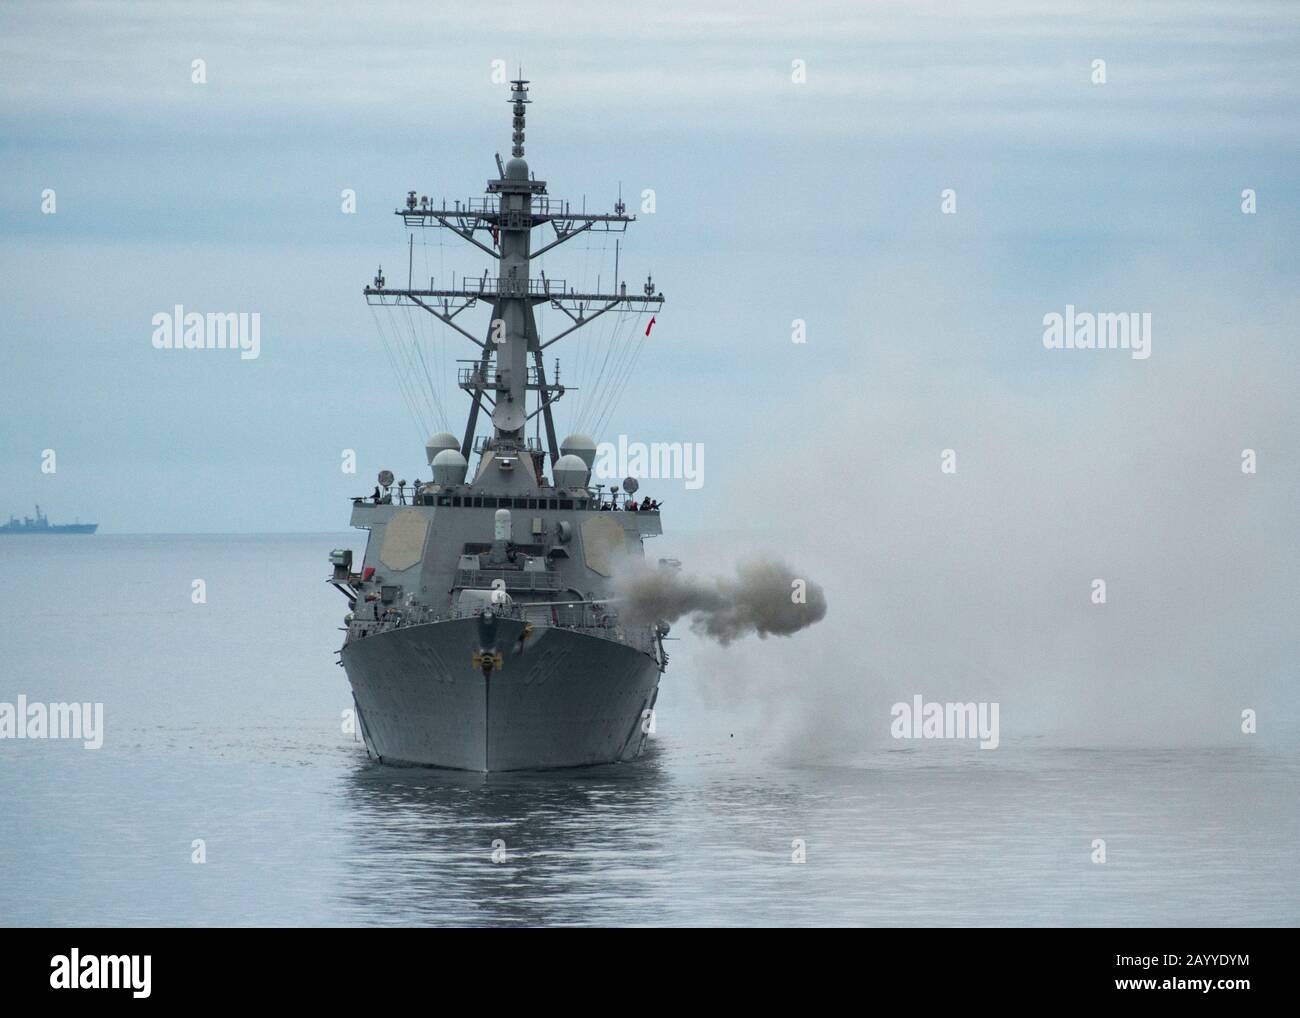 A U.S. Navy Arleigh Burke-class guided-missile destroyers USS Paul Hamilton fires a Mark 45, 5-inch gun during a live-fire exercise while underway December 7, 2019 in the Pacific Ocean. Stock Photo